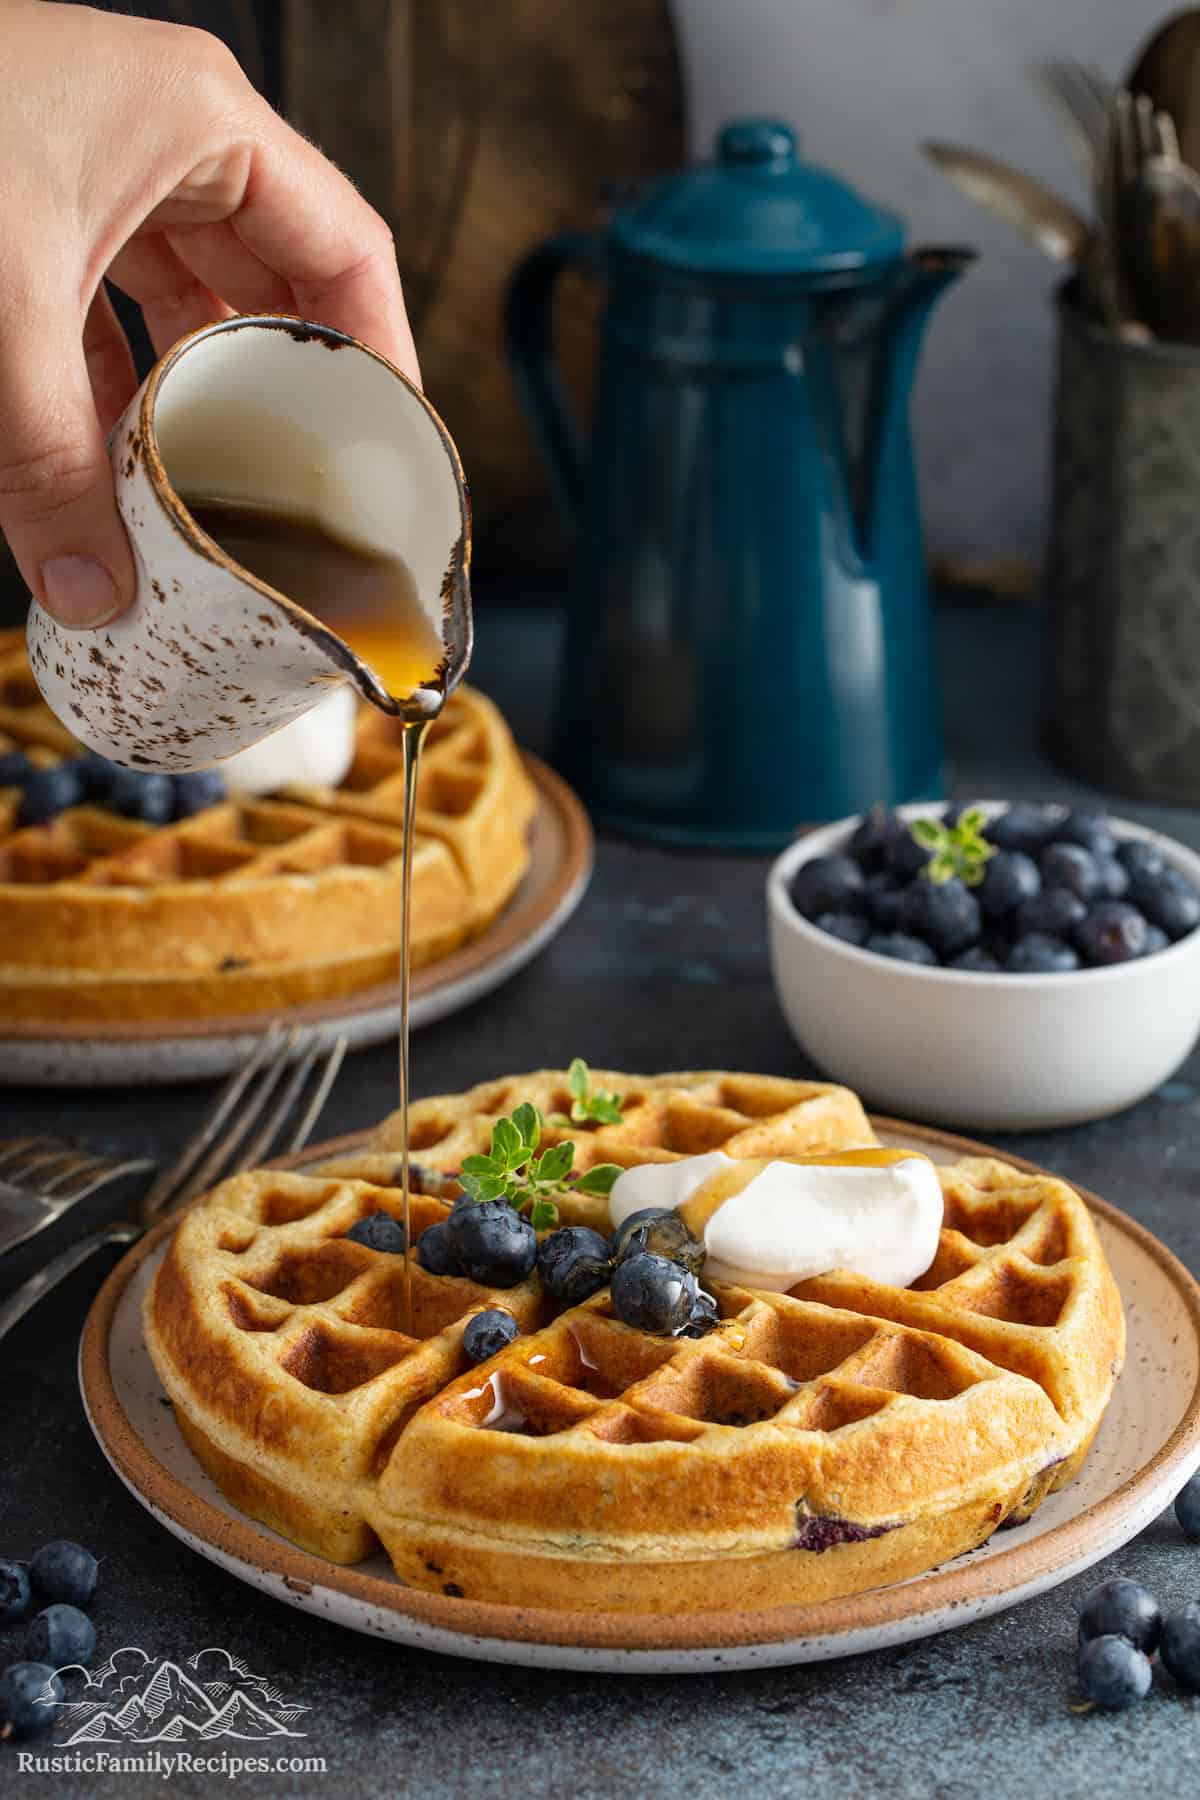 A Blueberry Buttermilk Waffle being topped with blueberries and a drizzle of maple syrup.